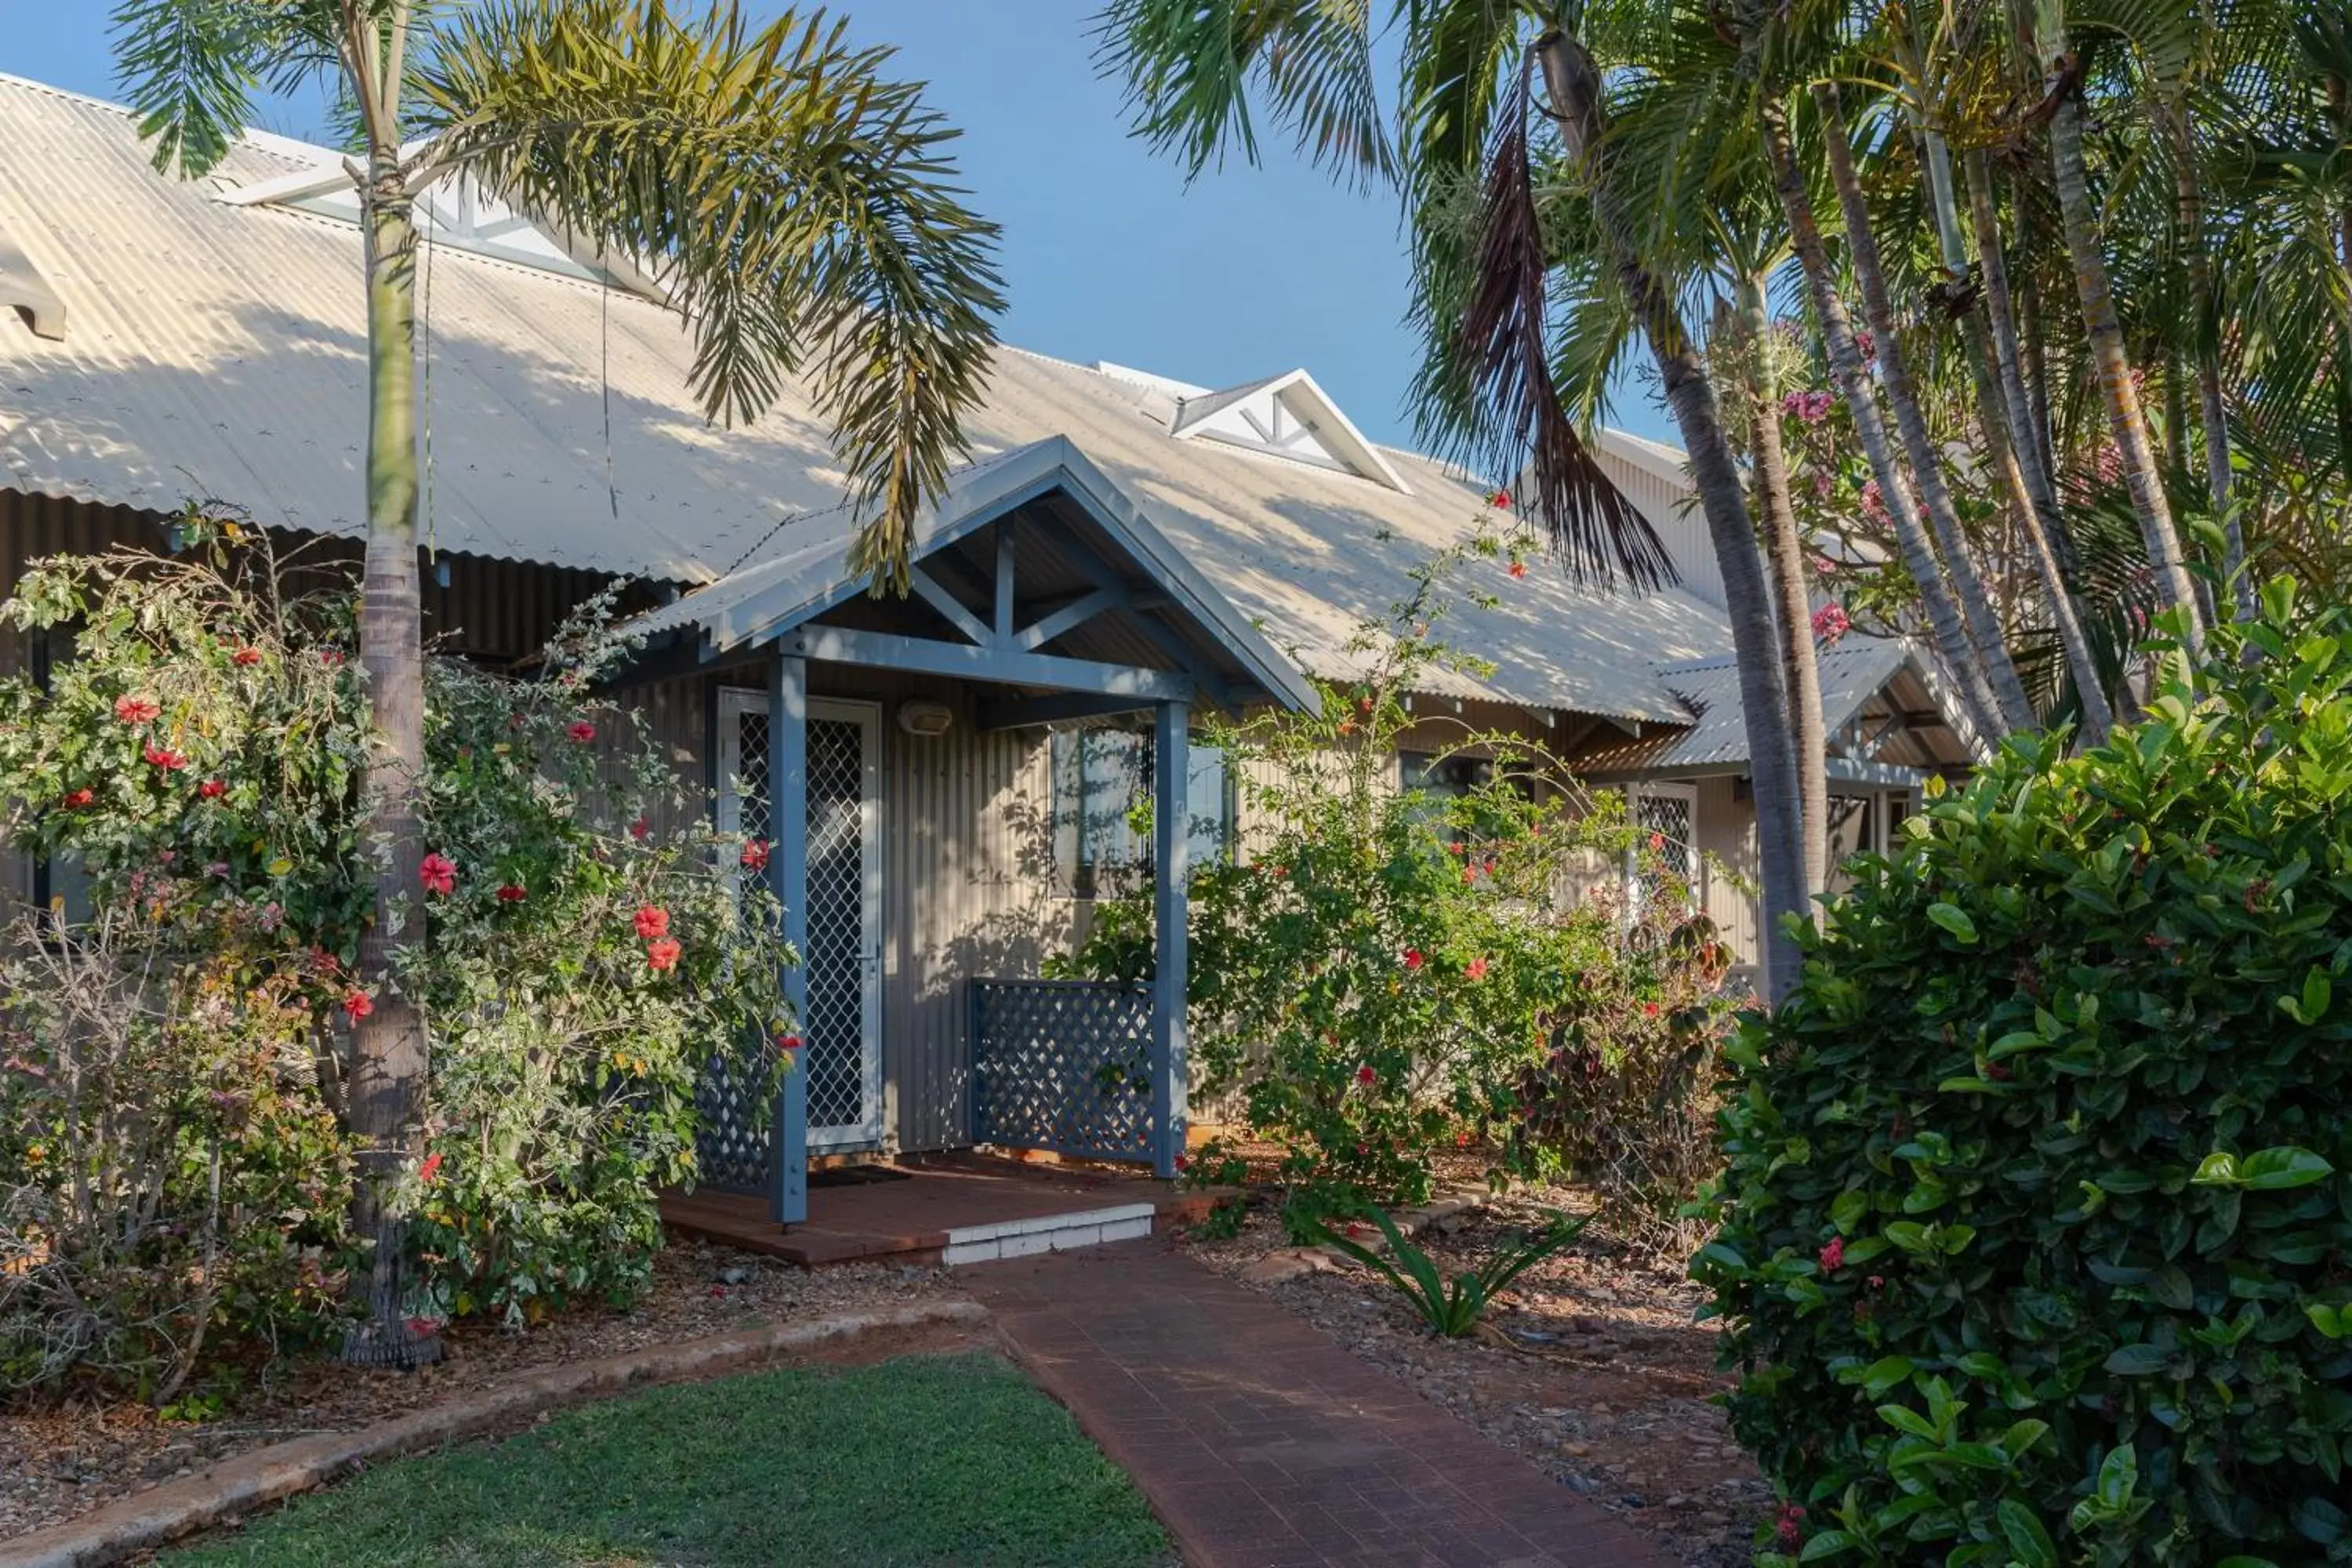 Property Building in Broome Beach Resort - Cable Beach, Broome